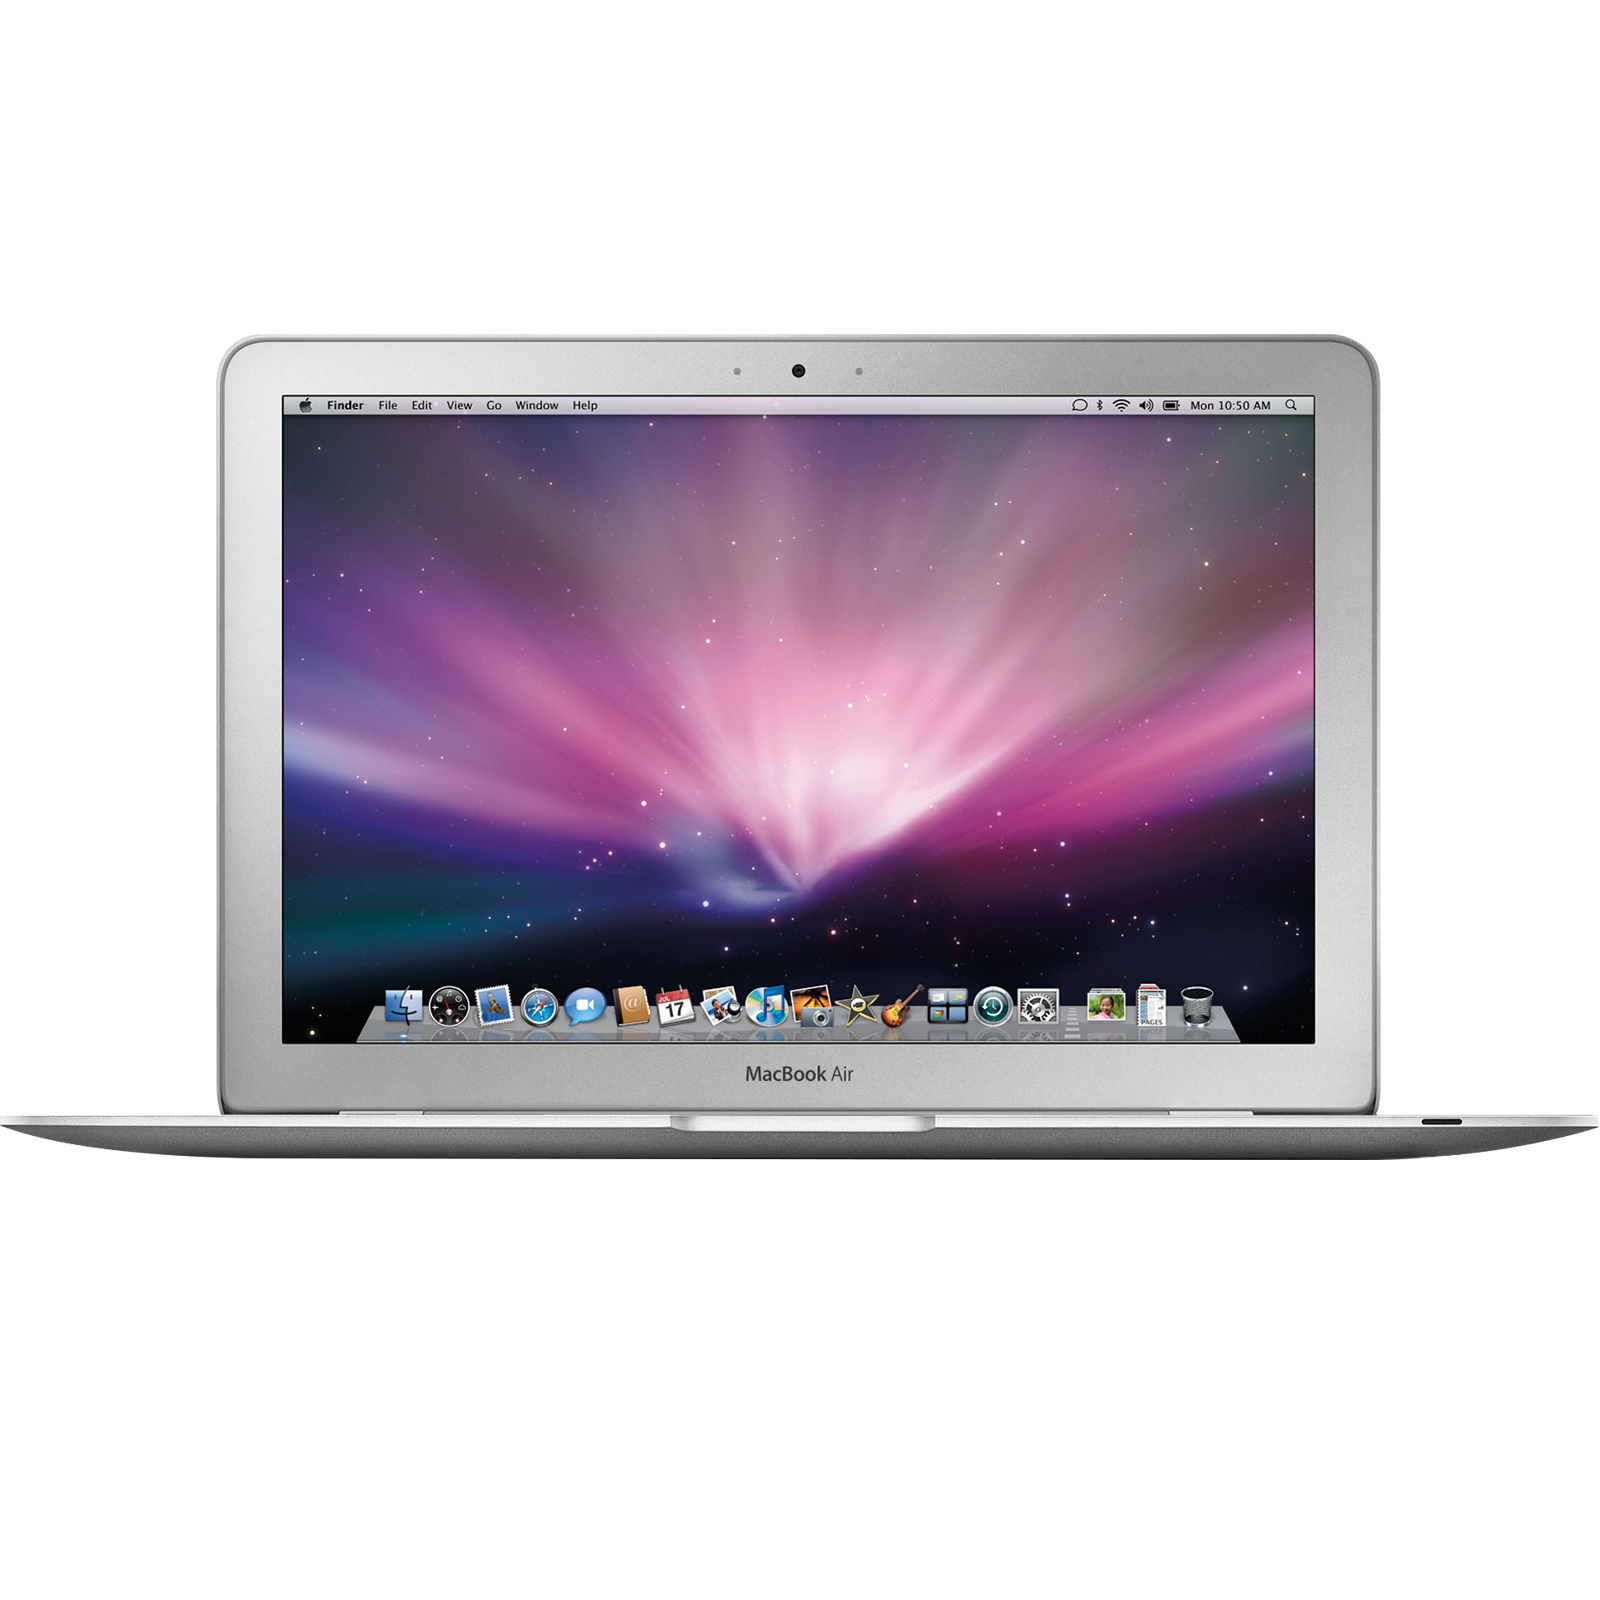 macbook air everything you need know imore #16005